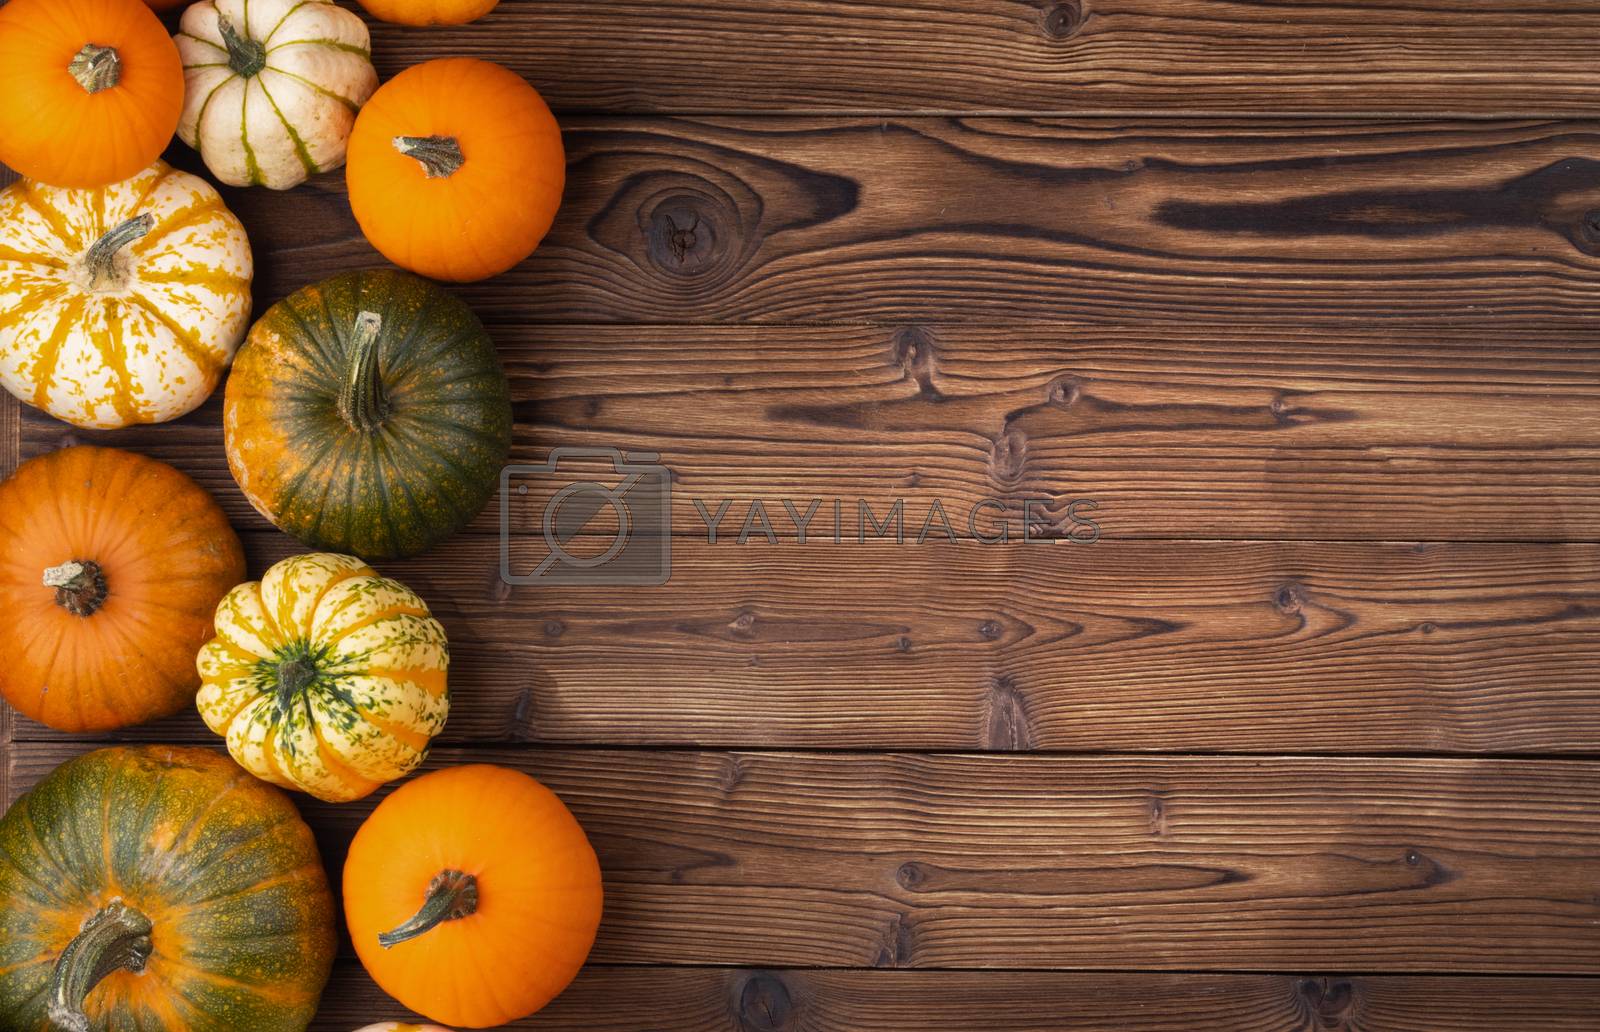 Royalty free image of Pumpkins on wooden background by Yellowj